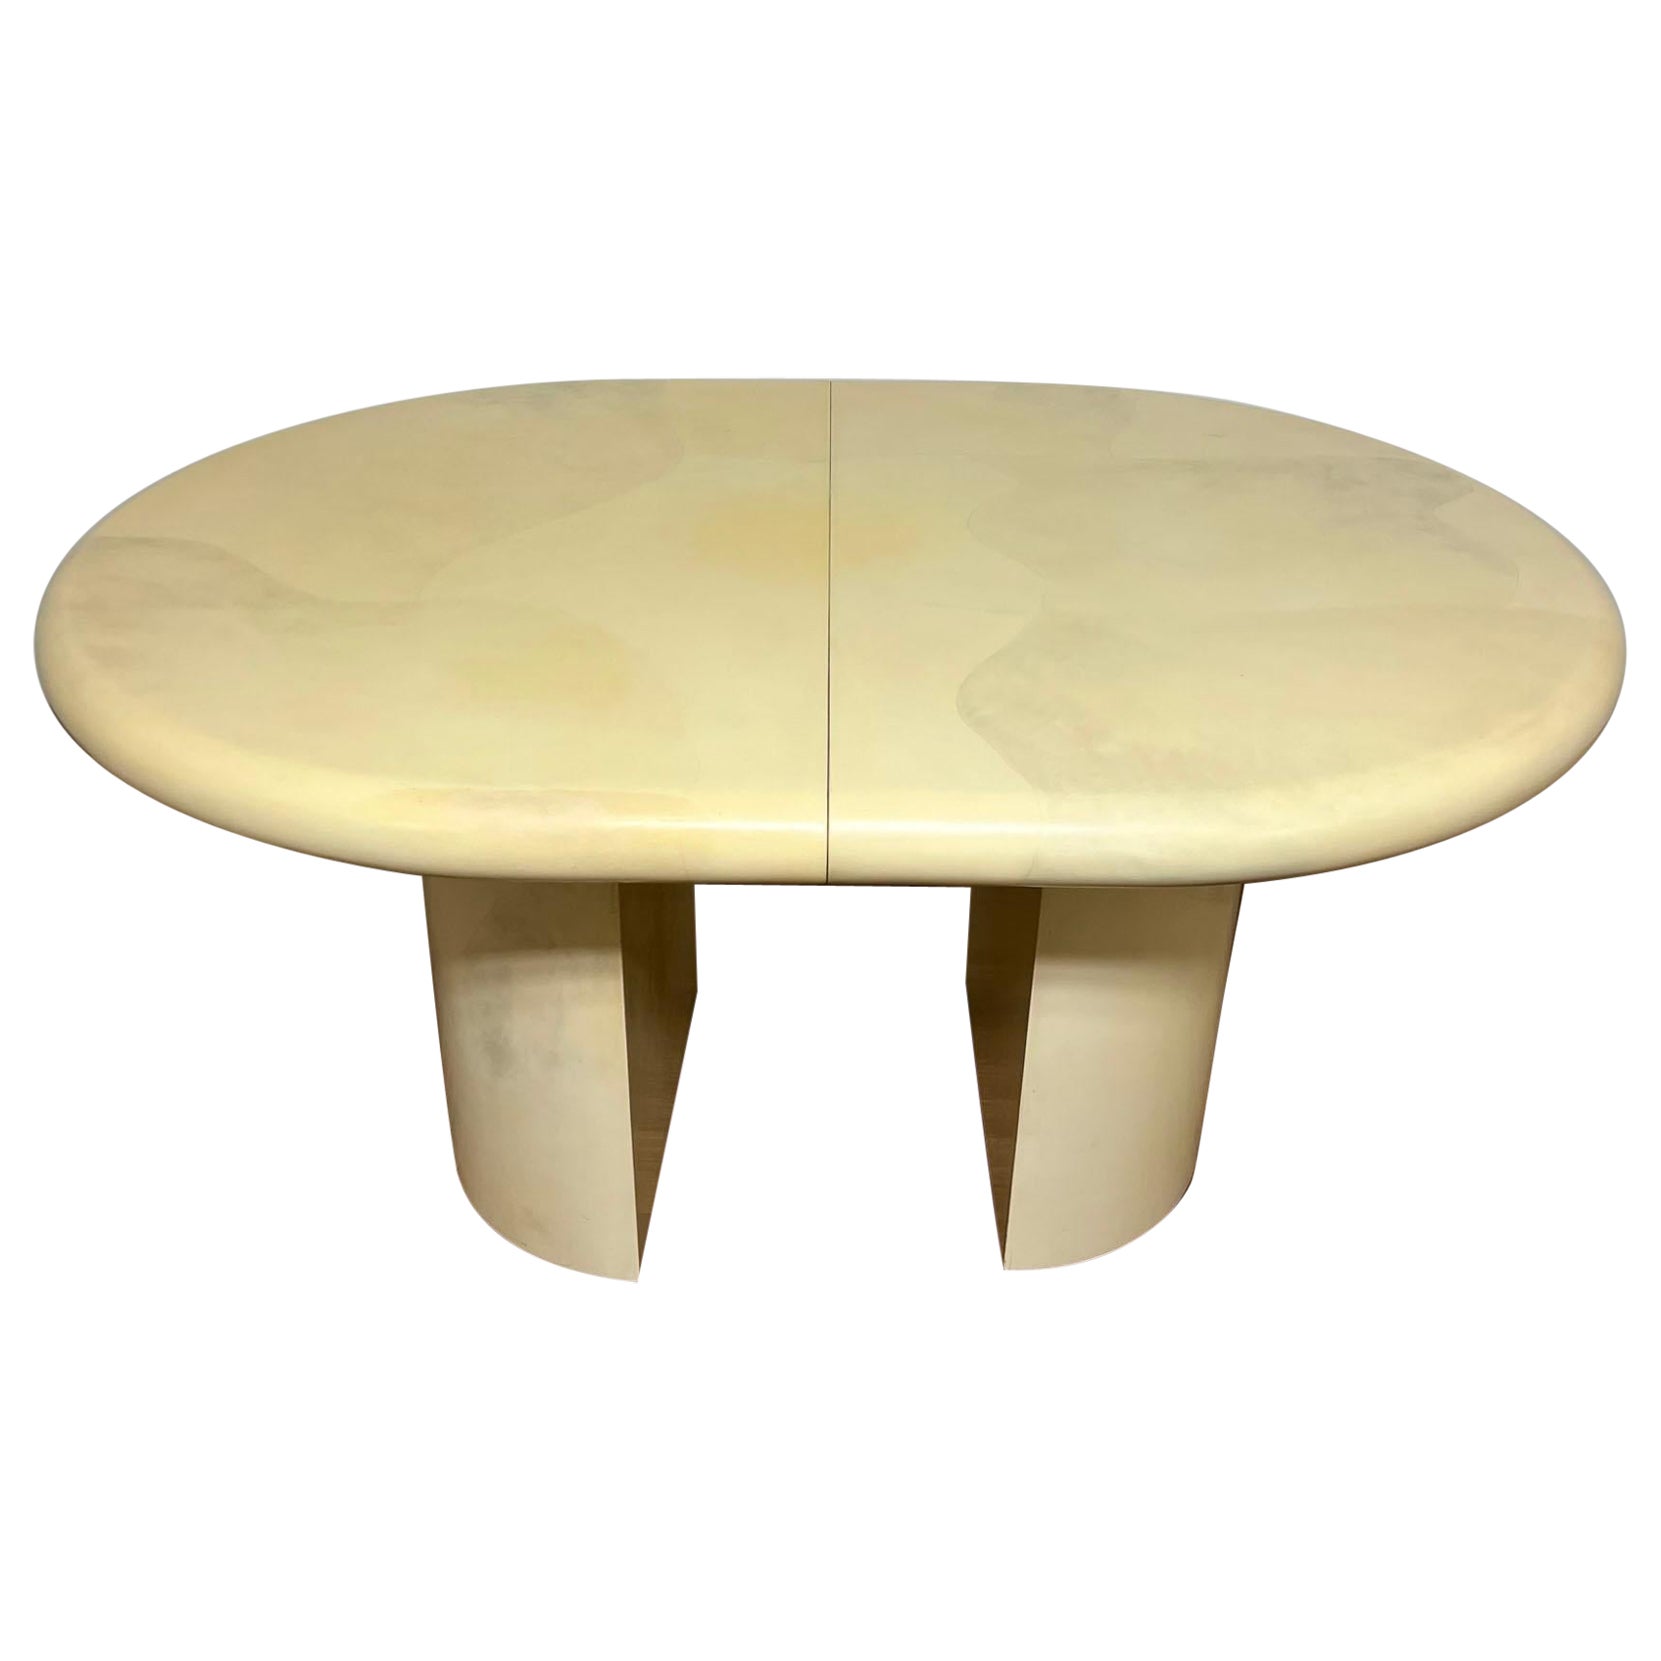 Faux Goat Skin Lacquered Dining Table With Two Leaves, Circa 1980s